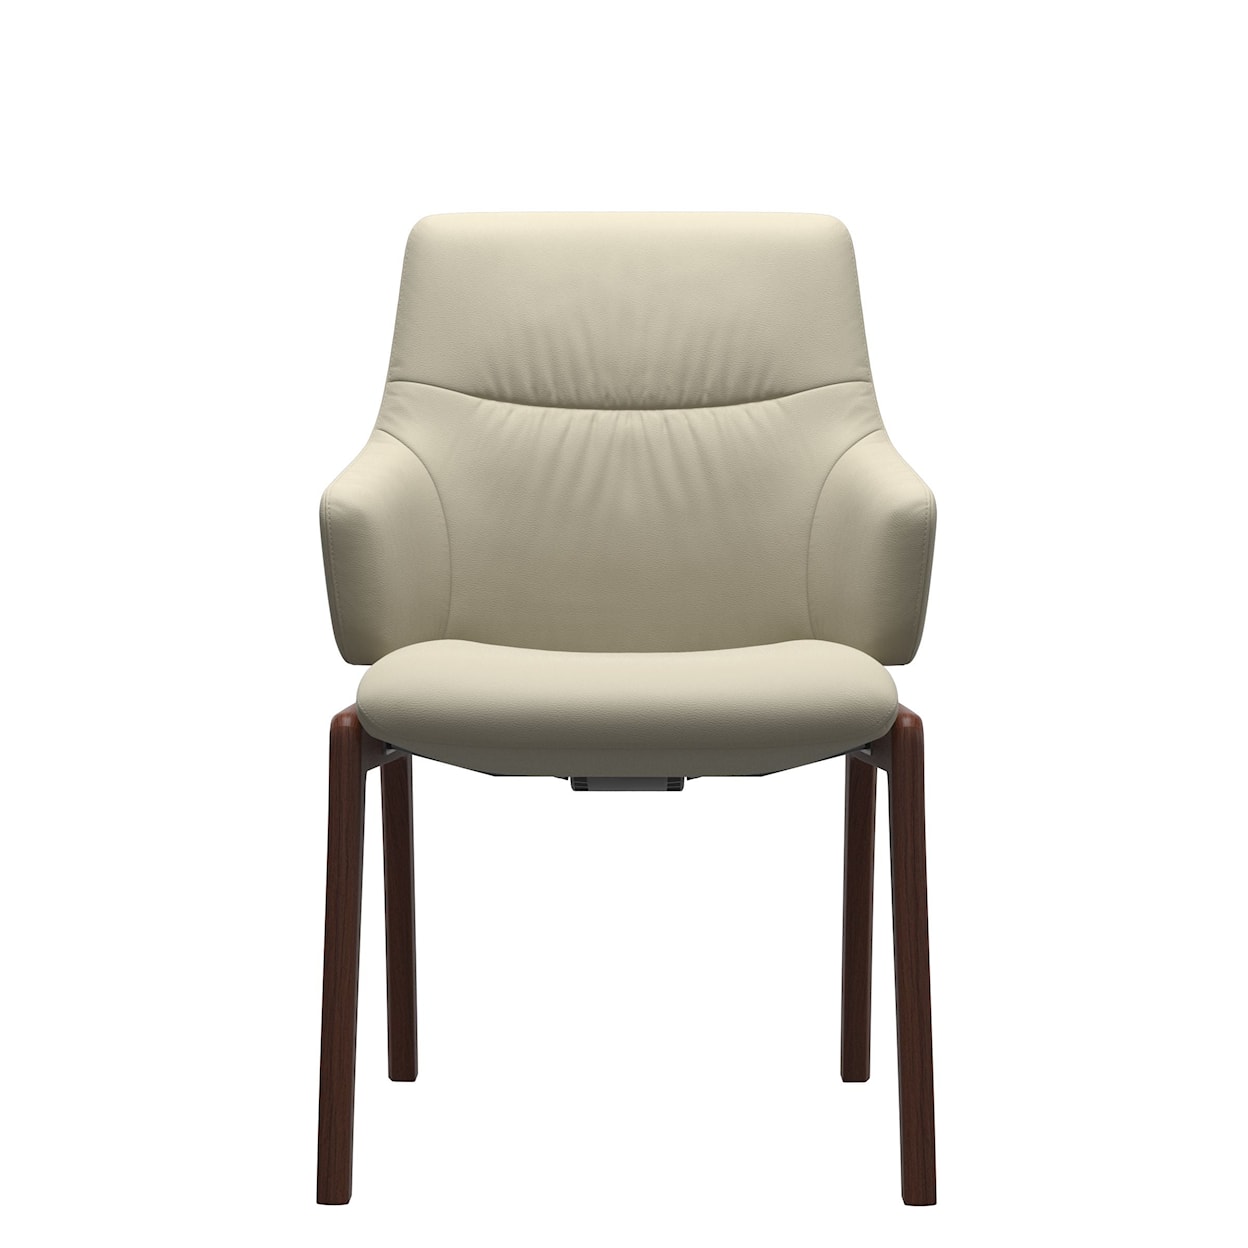 Stressless by Ekornes Stressless Mint Mint Large Low-Back Dining Chair w Arms D100